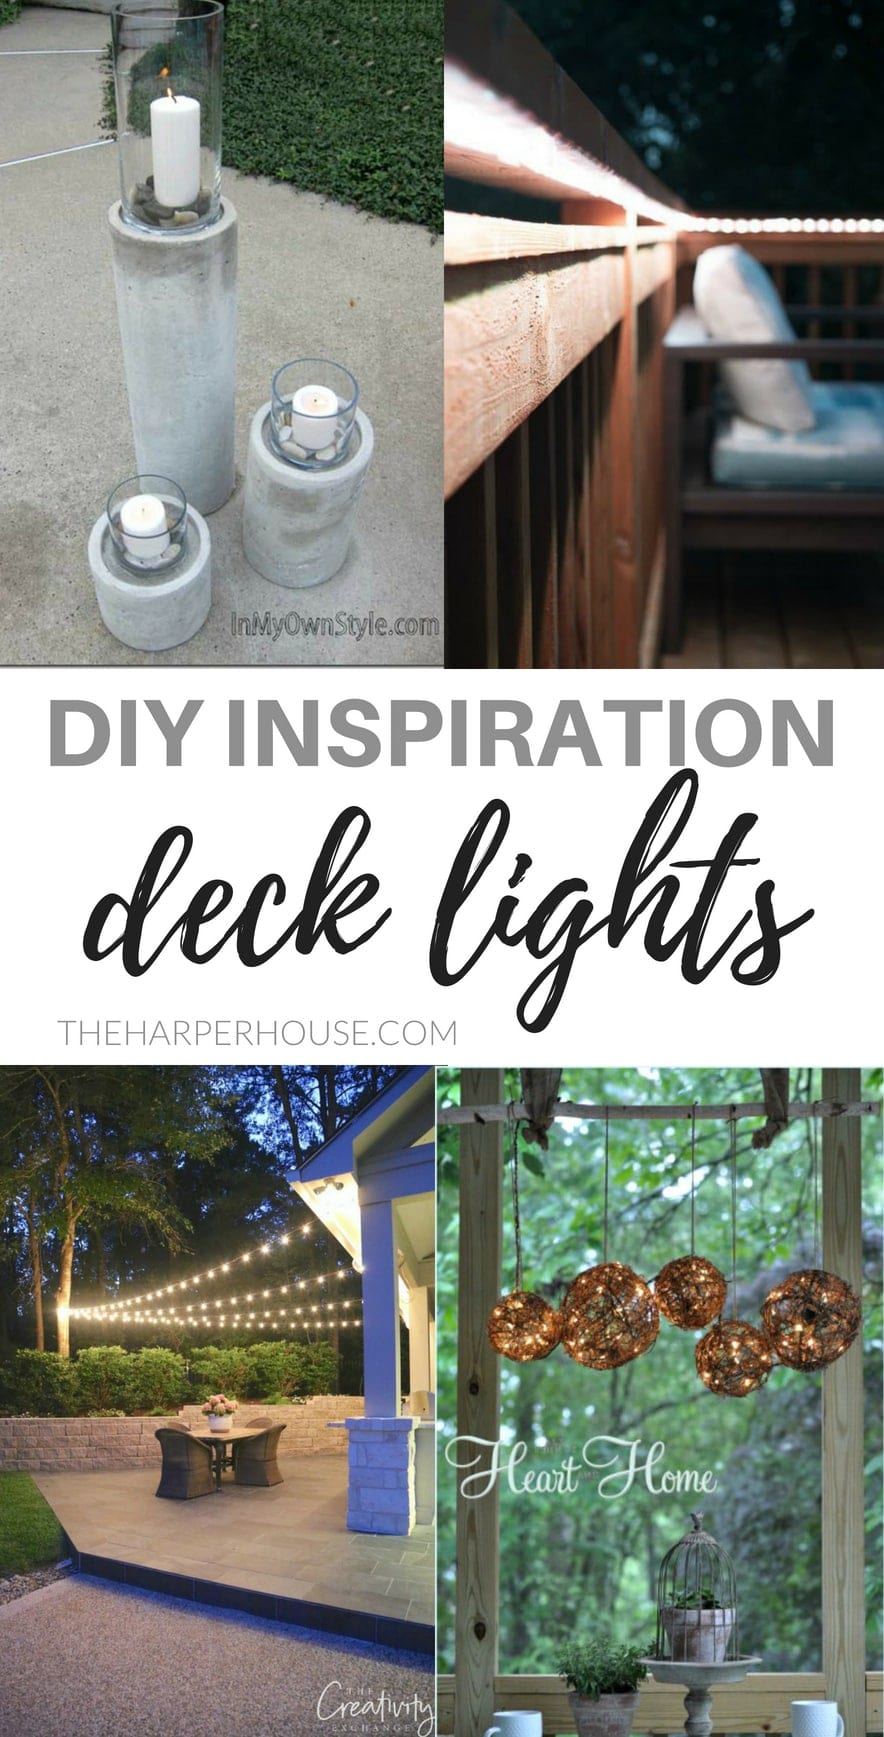 Give one of these DIY deck lighting ideas a try on your porch or patio this season. These unique outdoor lighting projects are sure to add character and brighten any space.